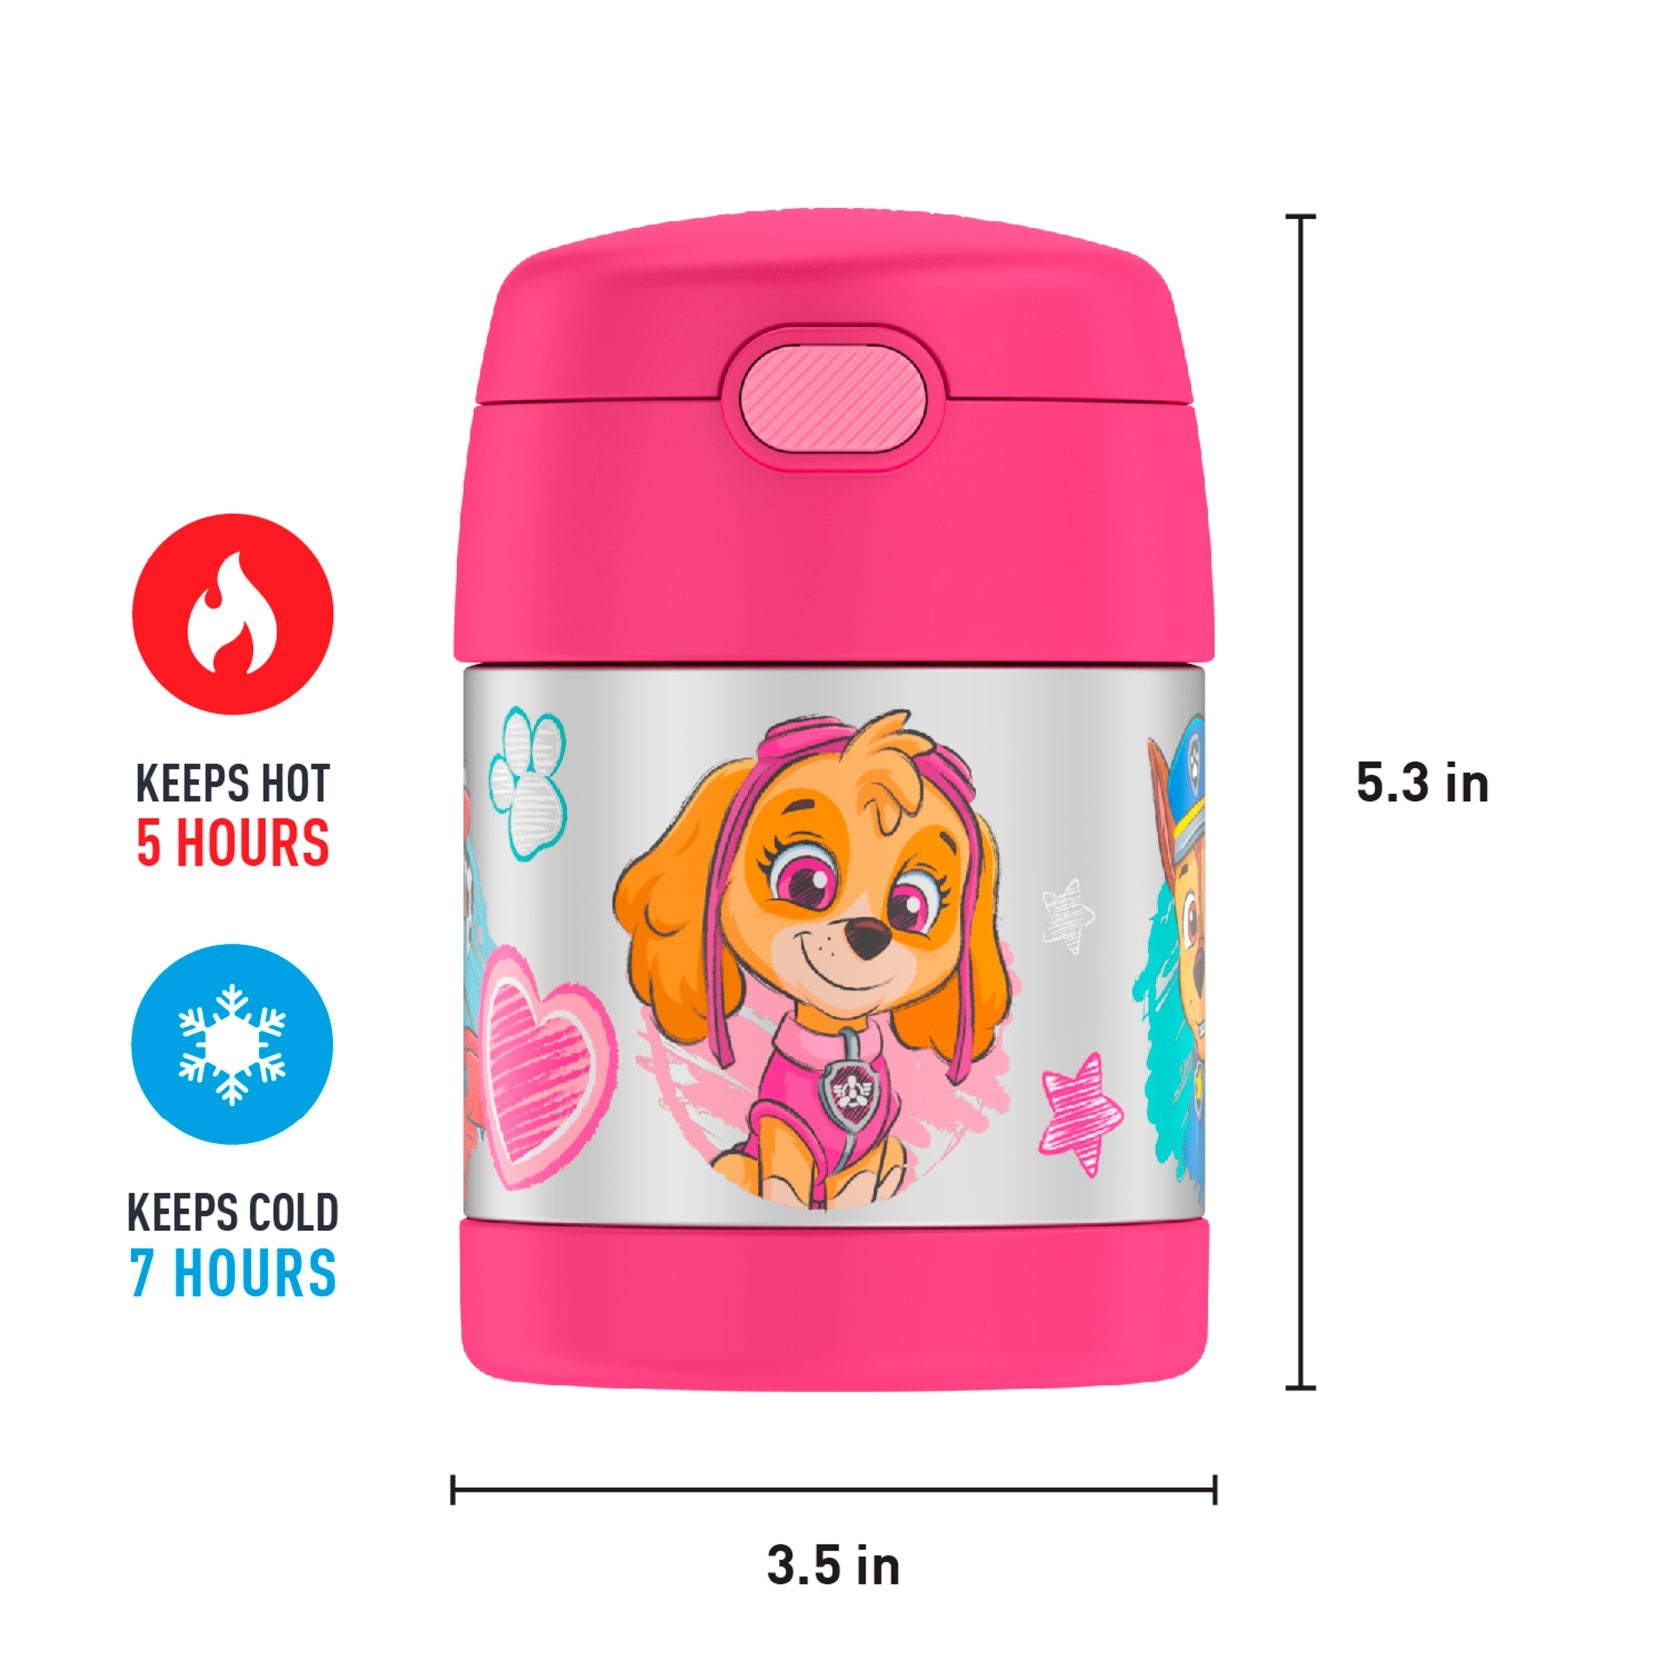 Thermos 10oz FUNtainer Food Jar with Spoon: Paw Patrol Hearts Thermal Food Jar by Thermos | Cute Kid Stuff